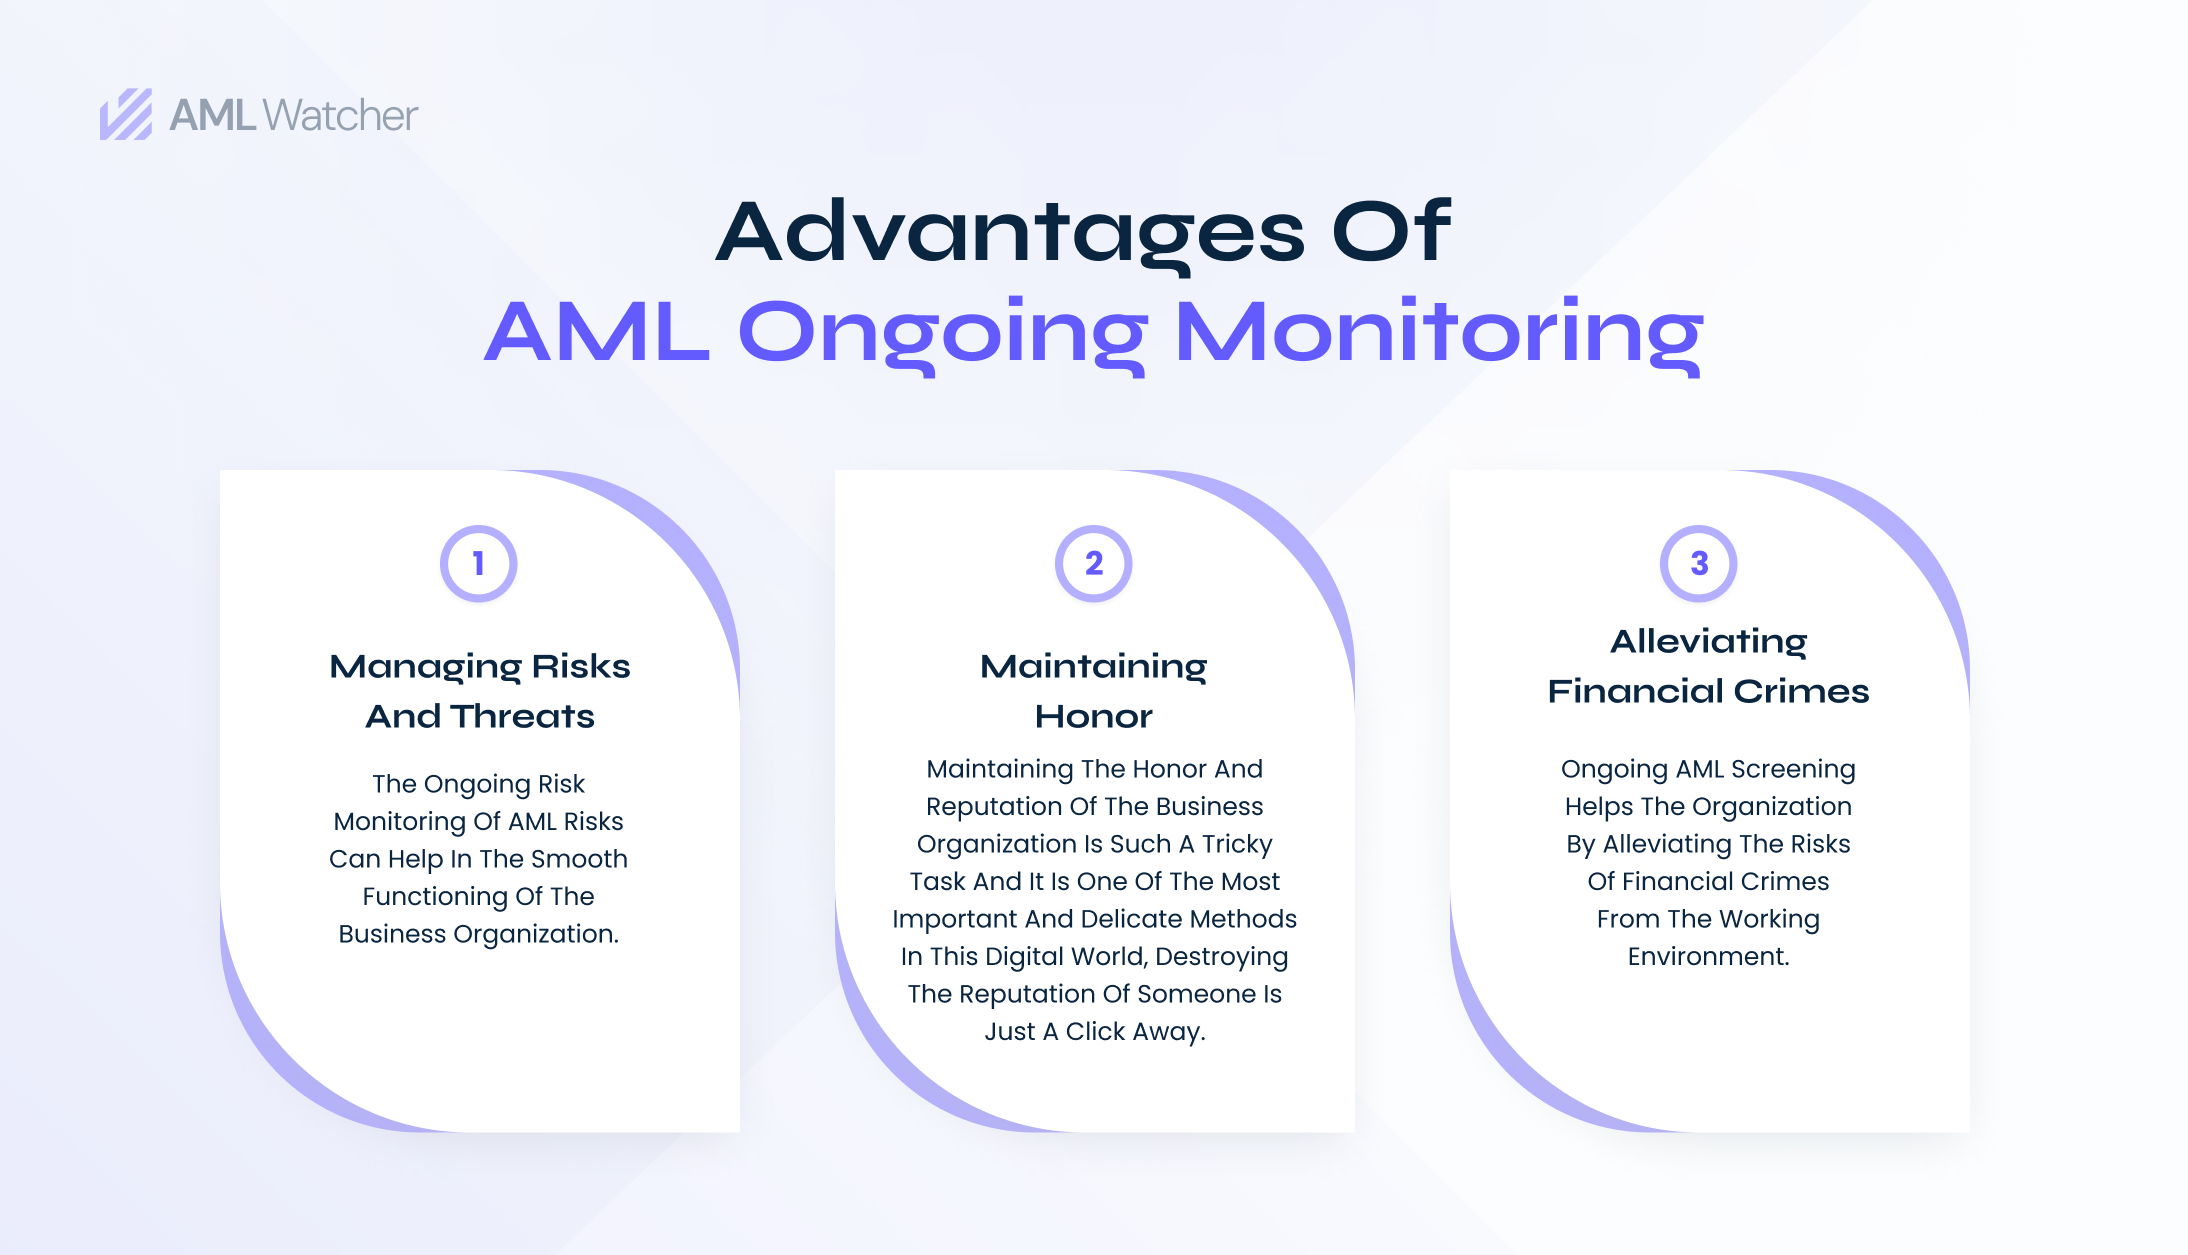 A large number of advantages are provided to business organizations by Ongoing AML monitoring services.